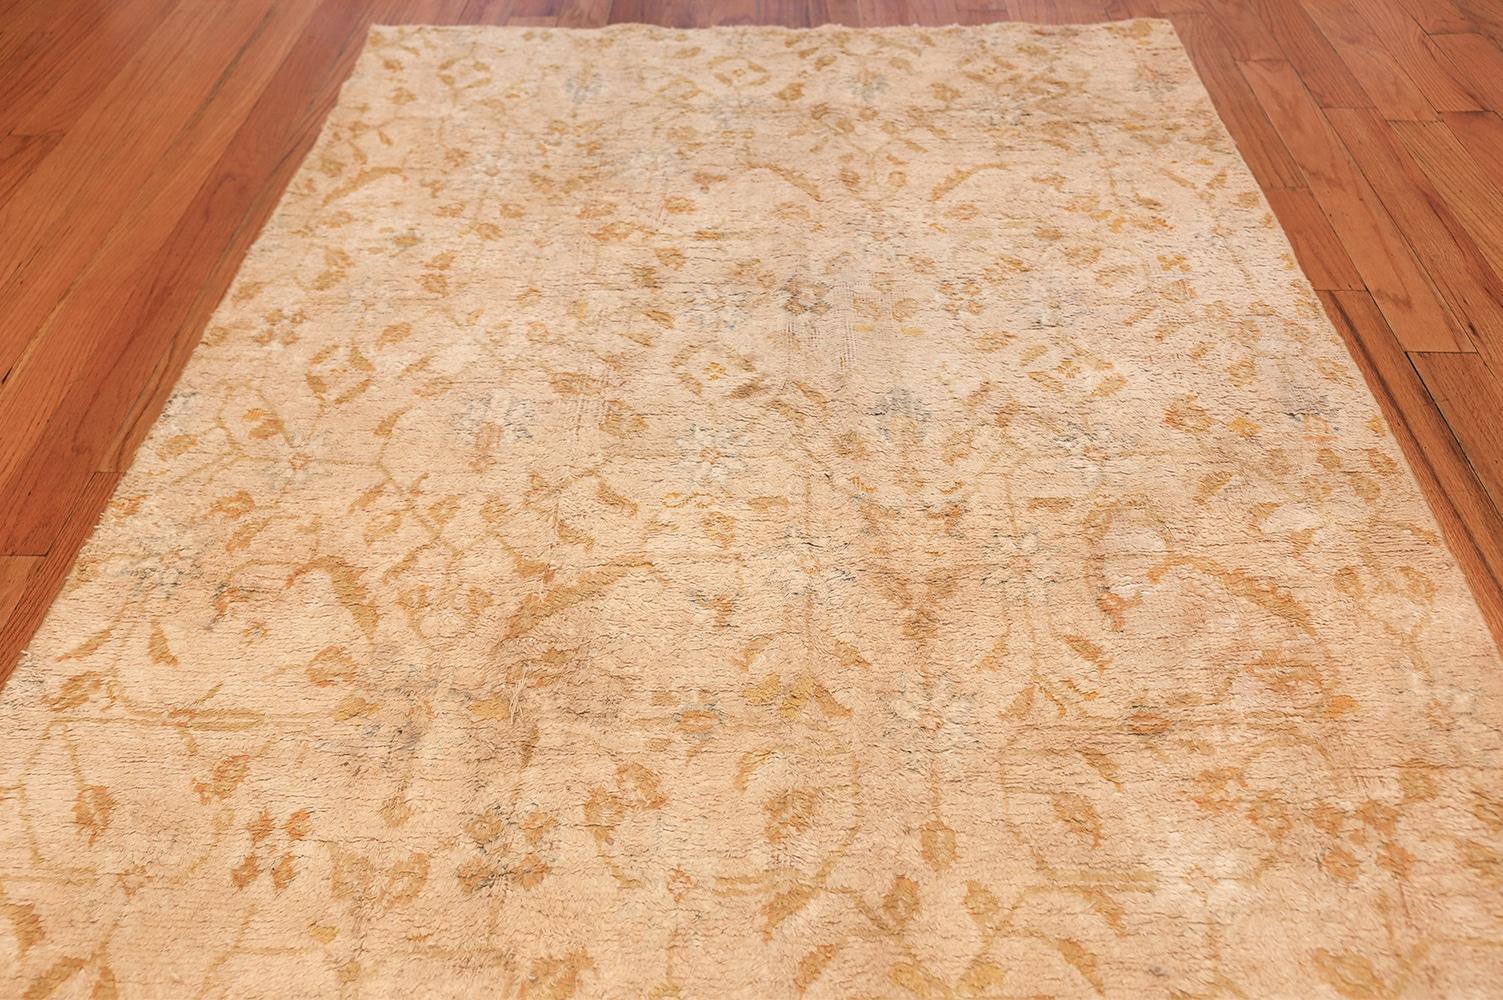 Long and Narrow Luxurious Ivory Indian Agra Antique Runner Rug 4'6